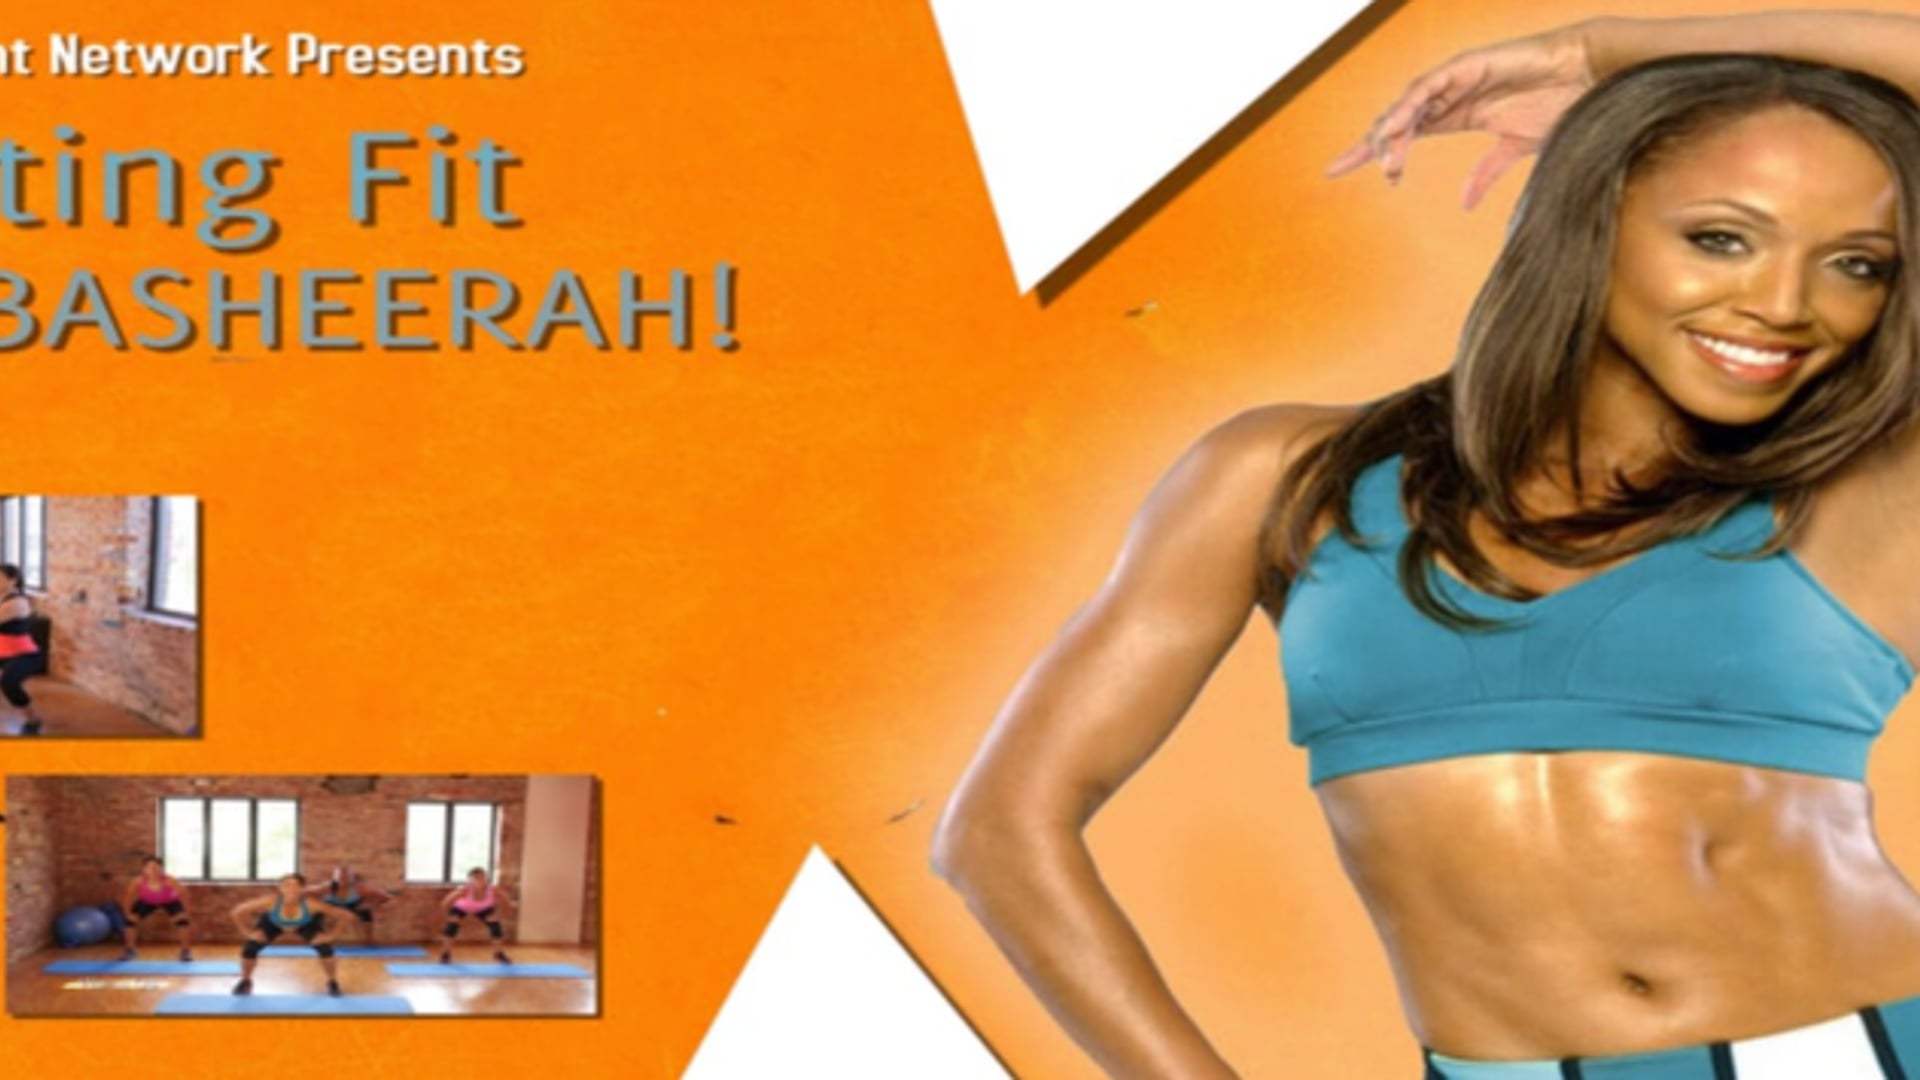 Getting Fit w/Basheerah! S2 E3